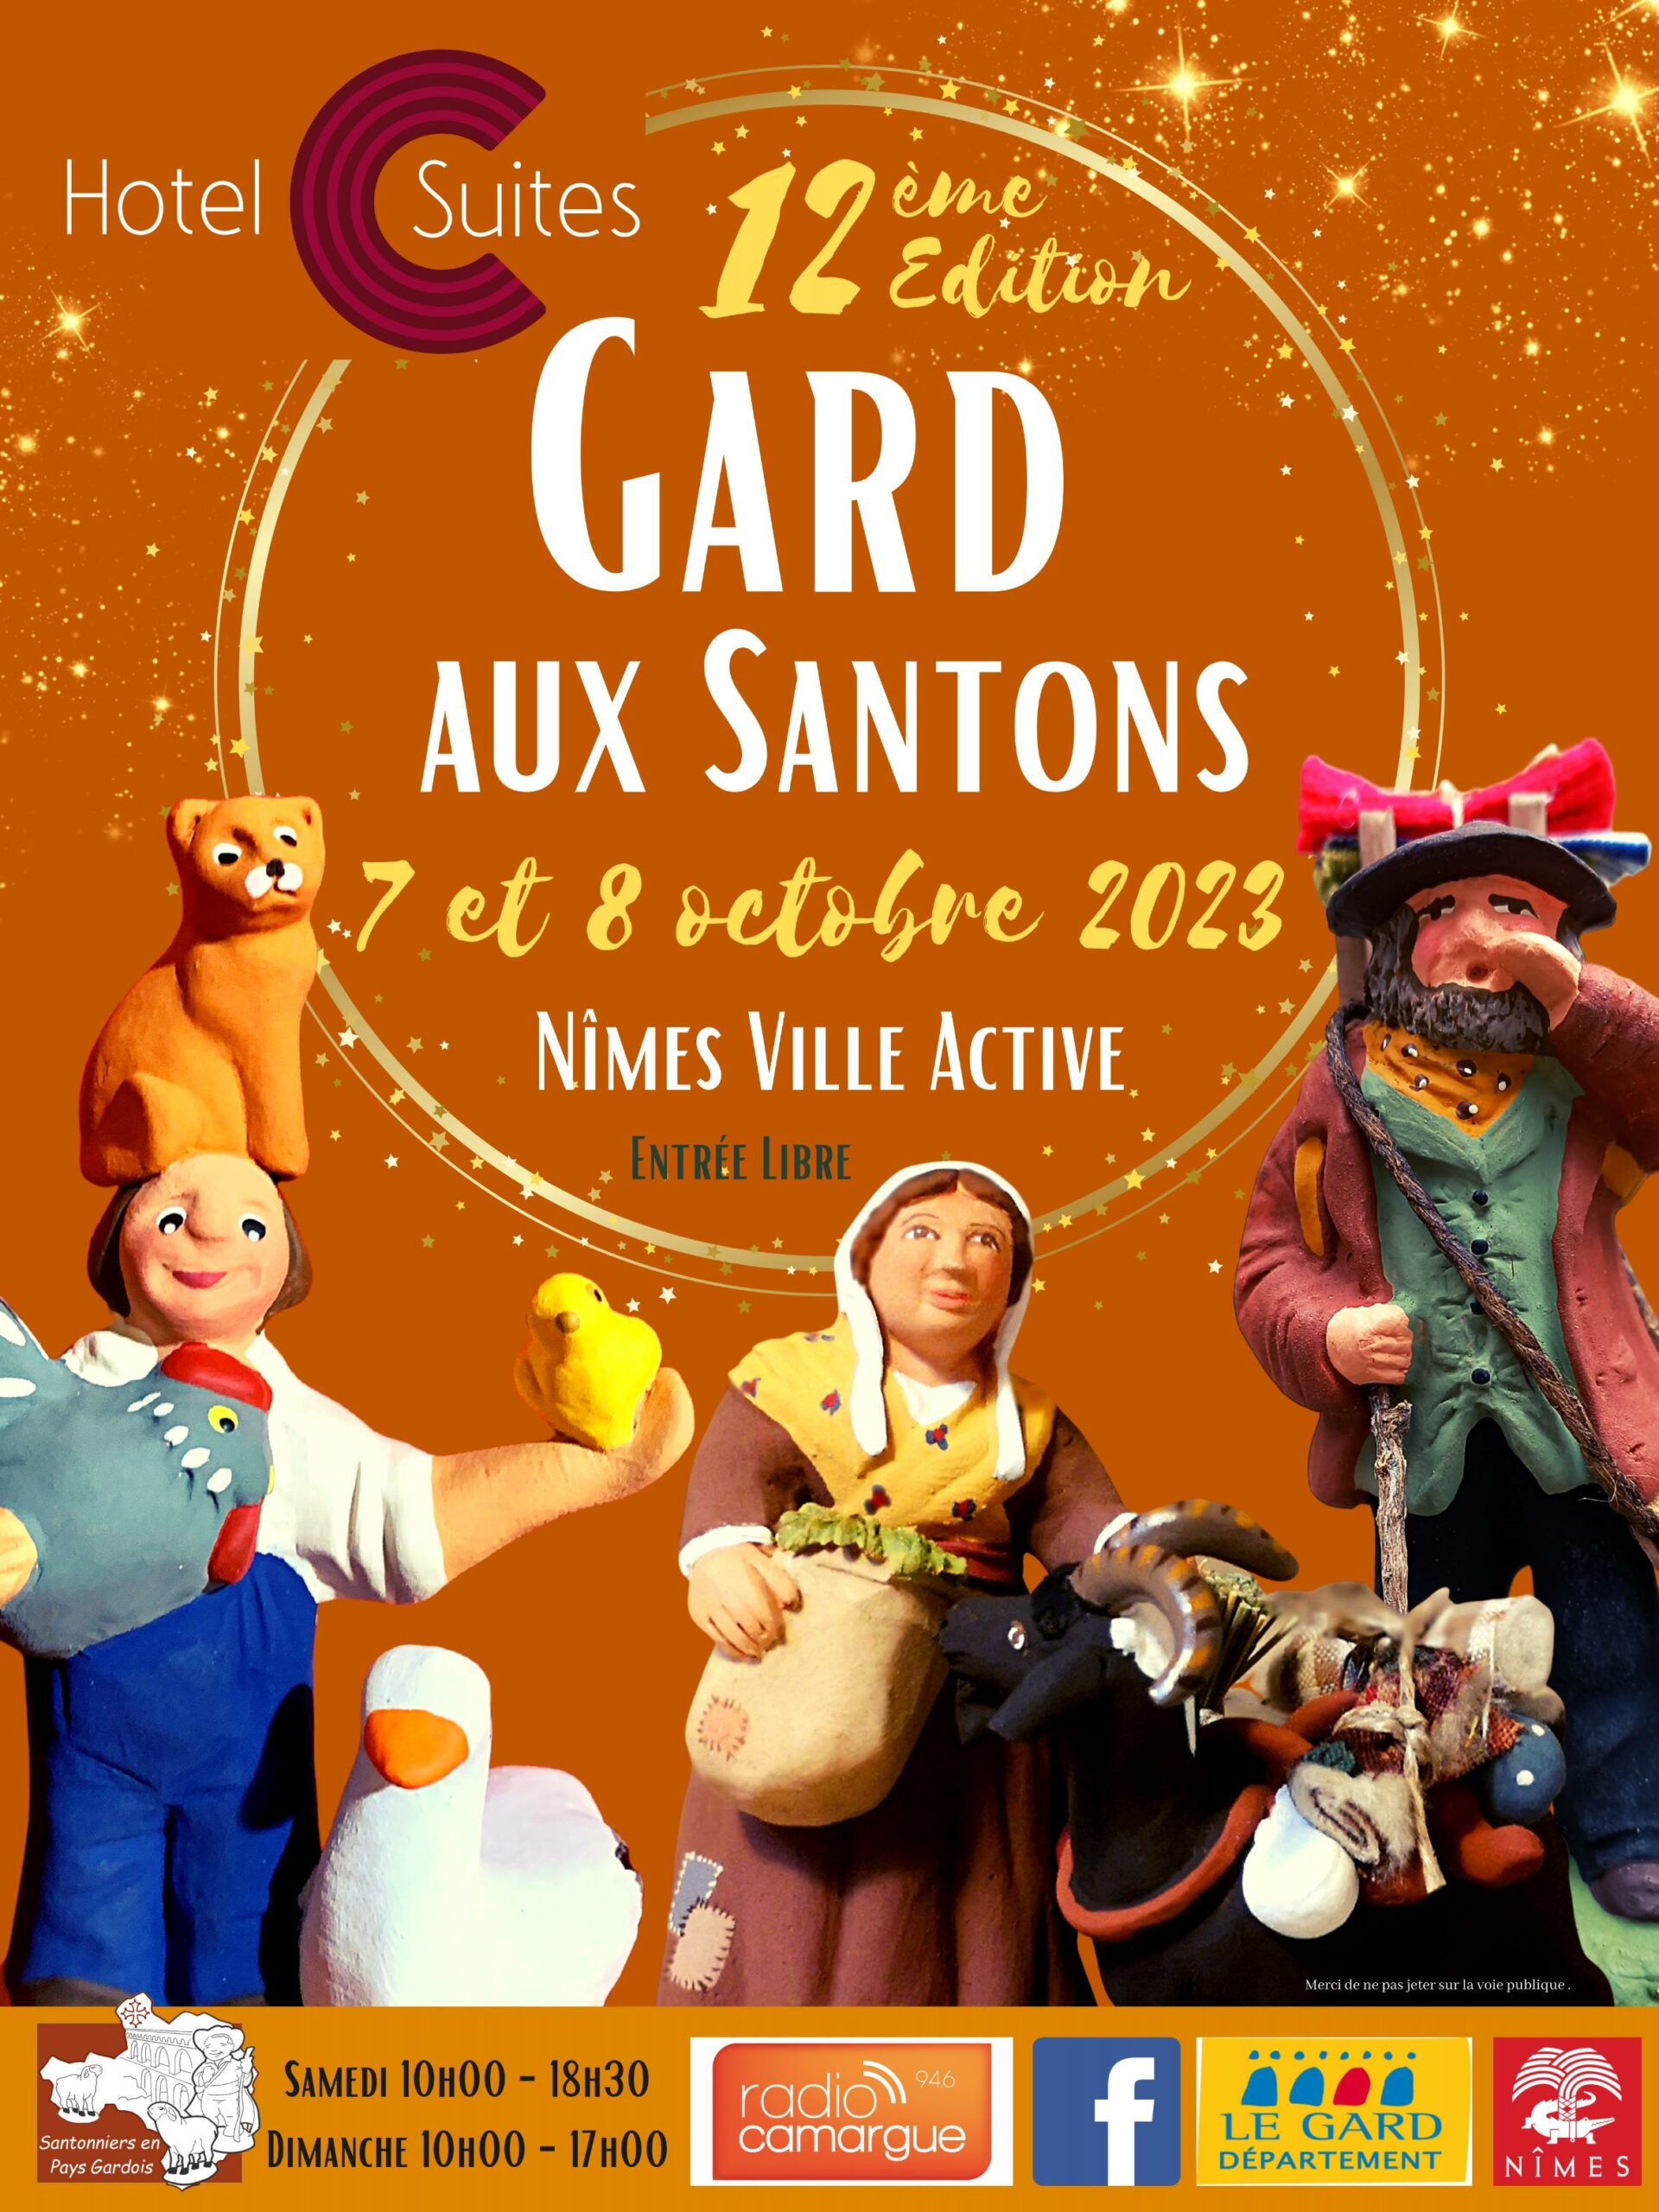 You are currently viewing “Gard aux santons” – Nimes – 2023